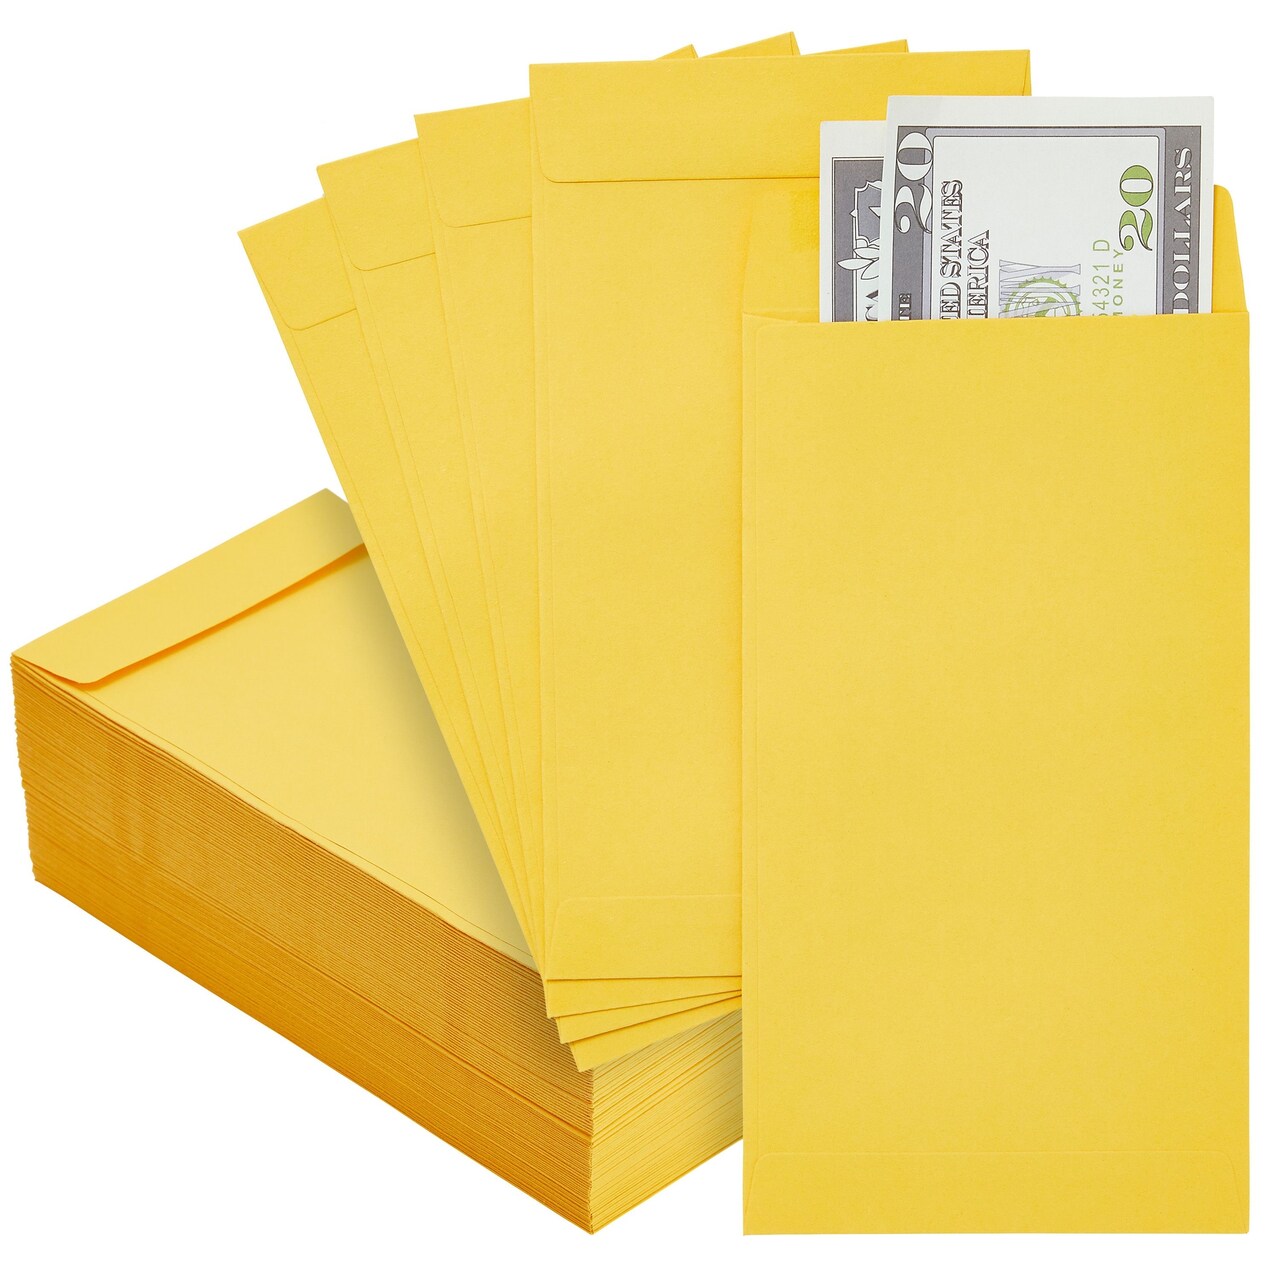 100 Pack Money Envelopes for Cash, Payroll, Money Saving, Coins, Currency, 100GSM, Yellow (4 x 7 In)